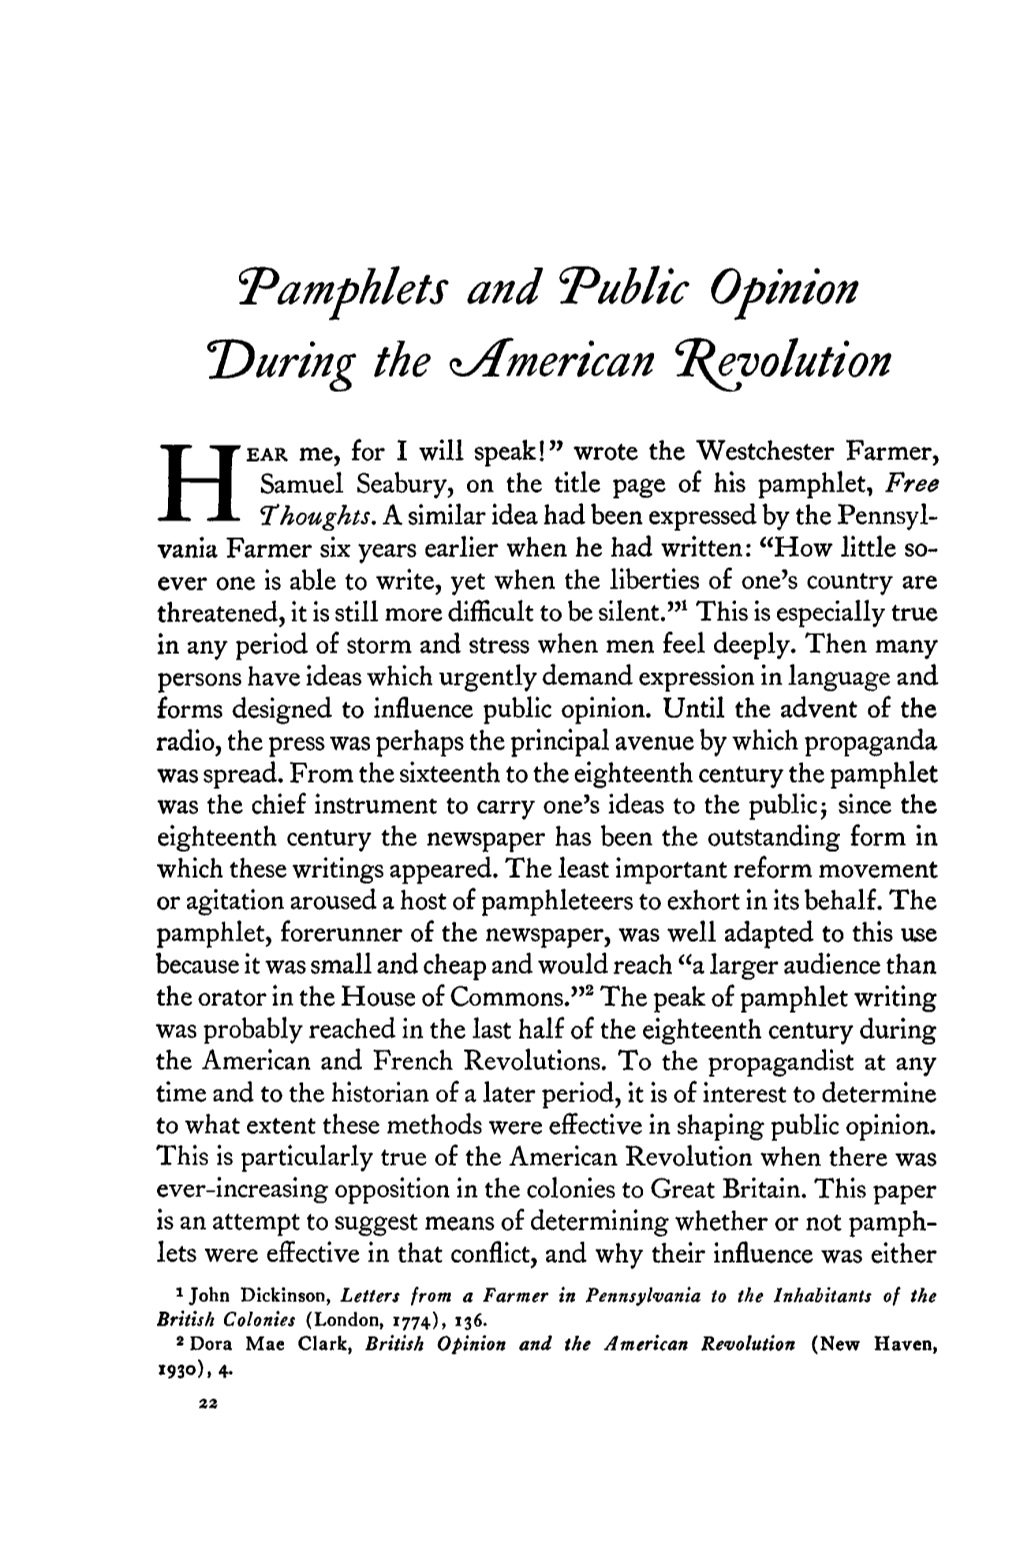 "Pamphlets and Public Opinion 'During the ^American 'Revolution